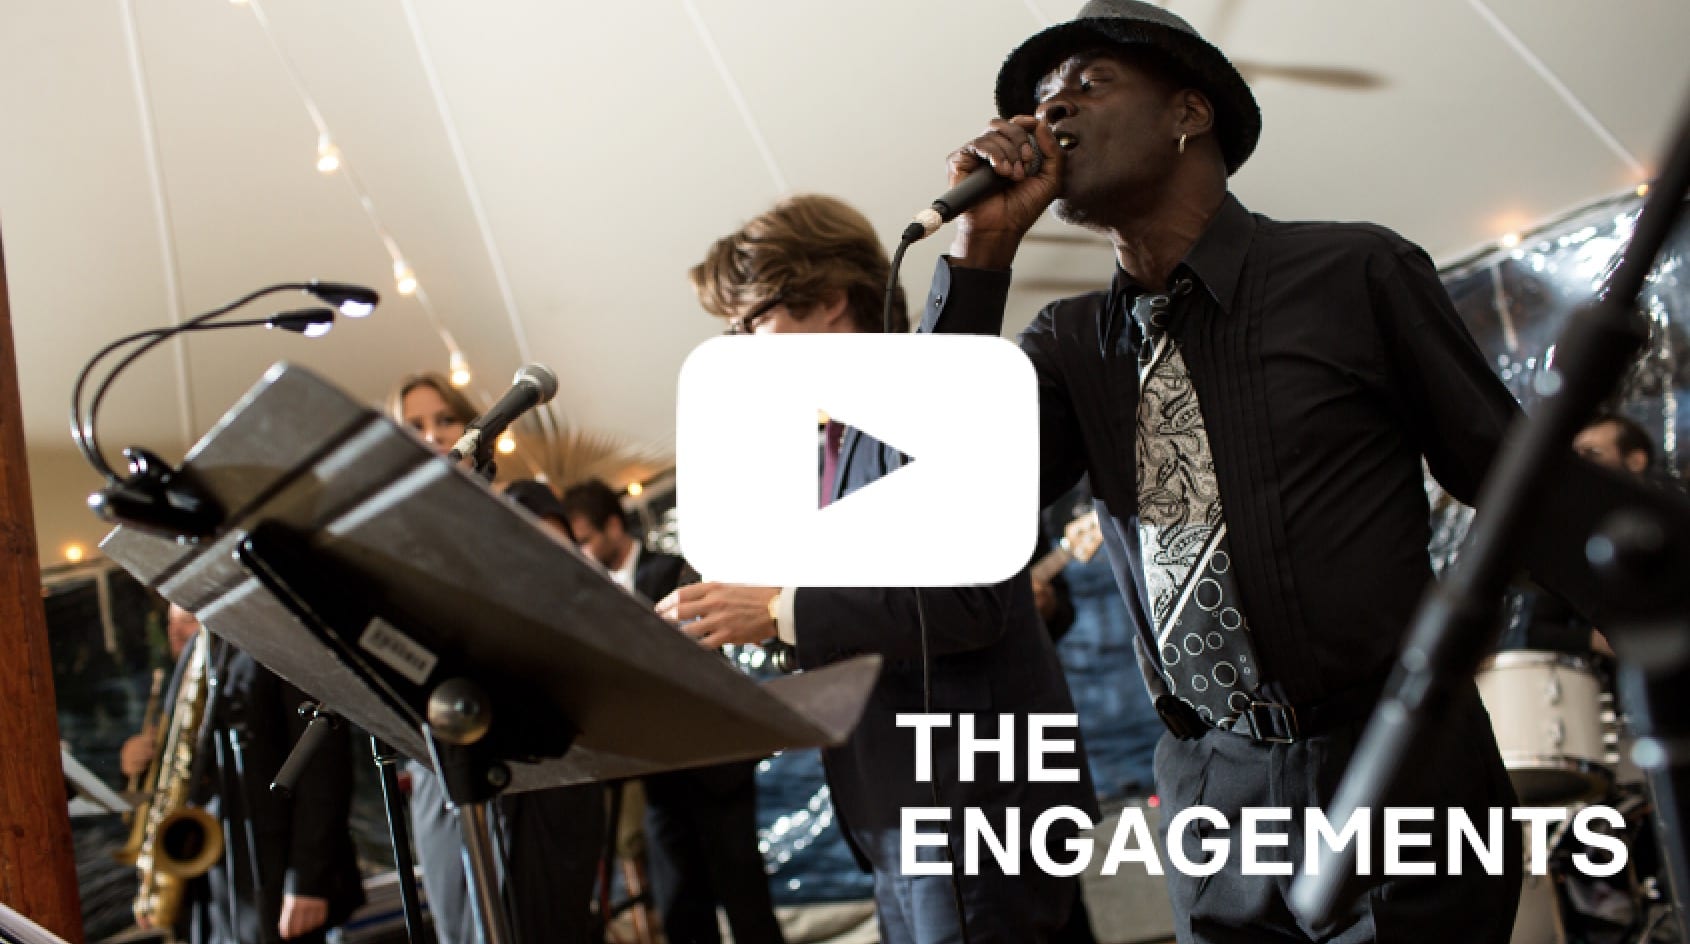 The Engagements Video Player Thumbnail 80s cover band NYC